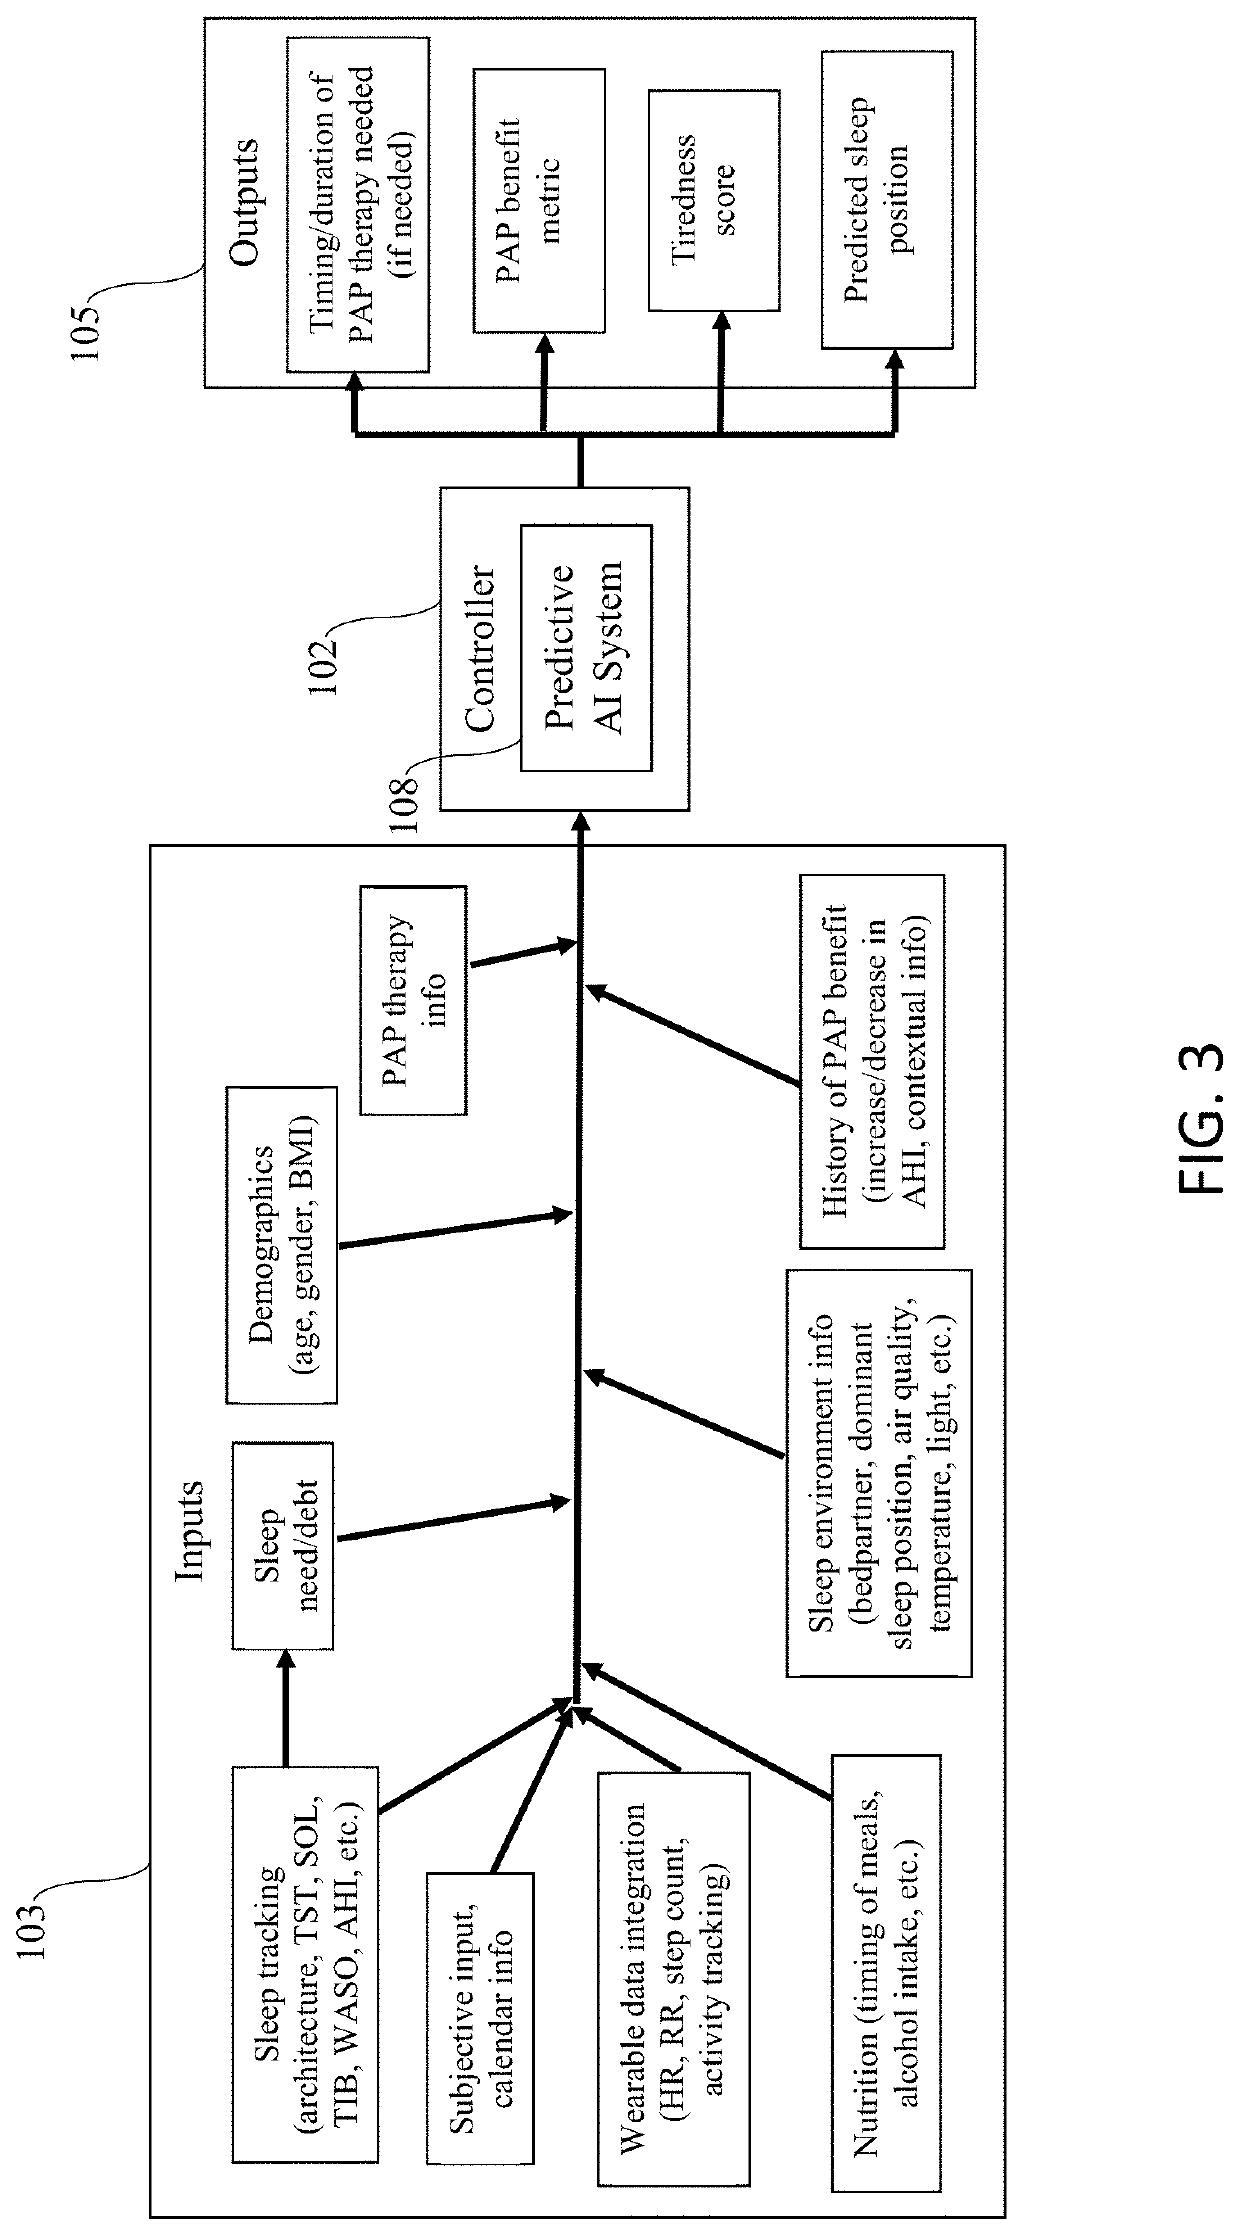 System and method for determining and providing personalized pap therapy recommendations for a patient